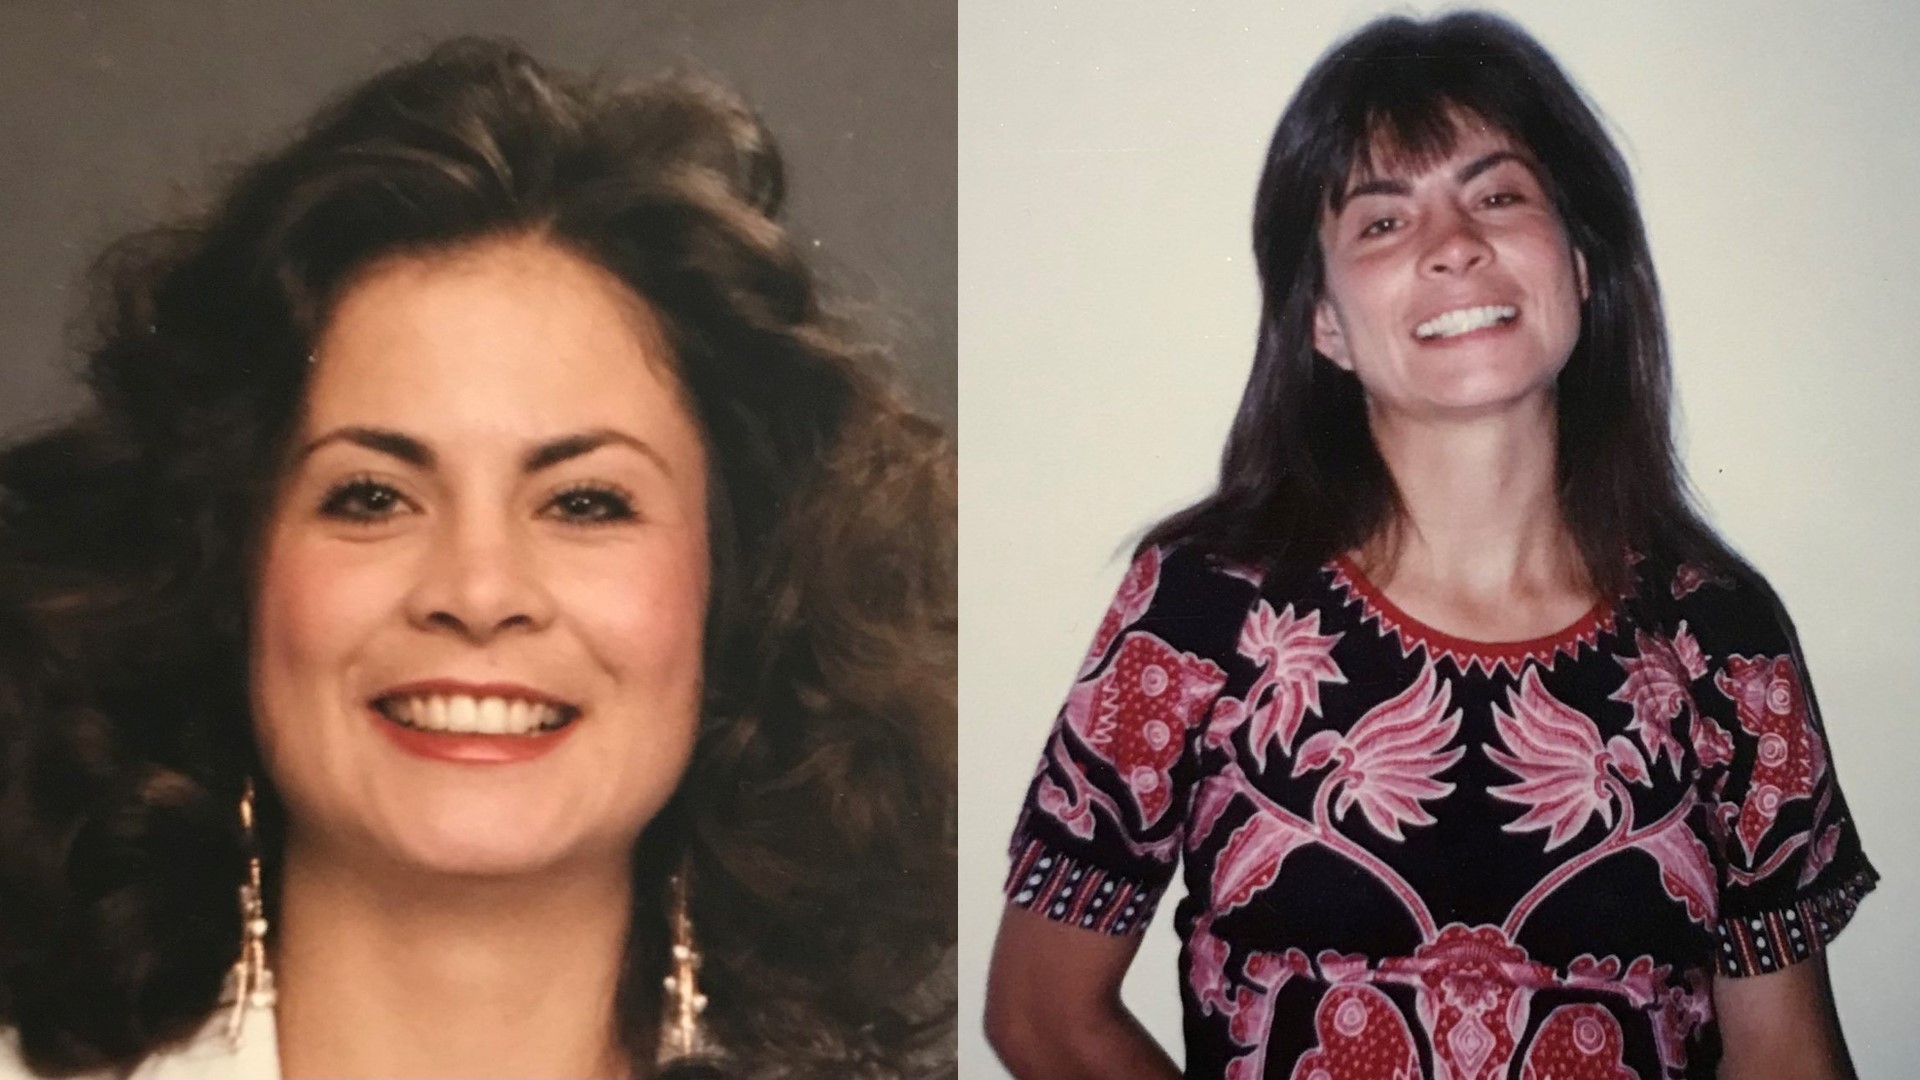 The remains of Linda Moore were found in a remote wilderness area in Snohomish County in March of 2022. She was reported missing from North Seattle in October 1990.